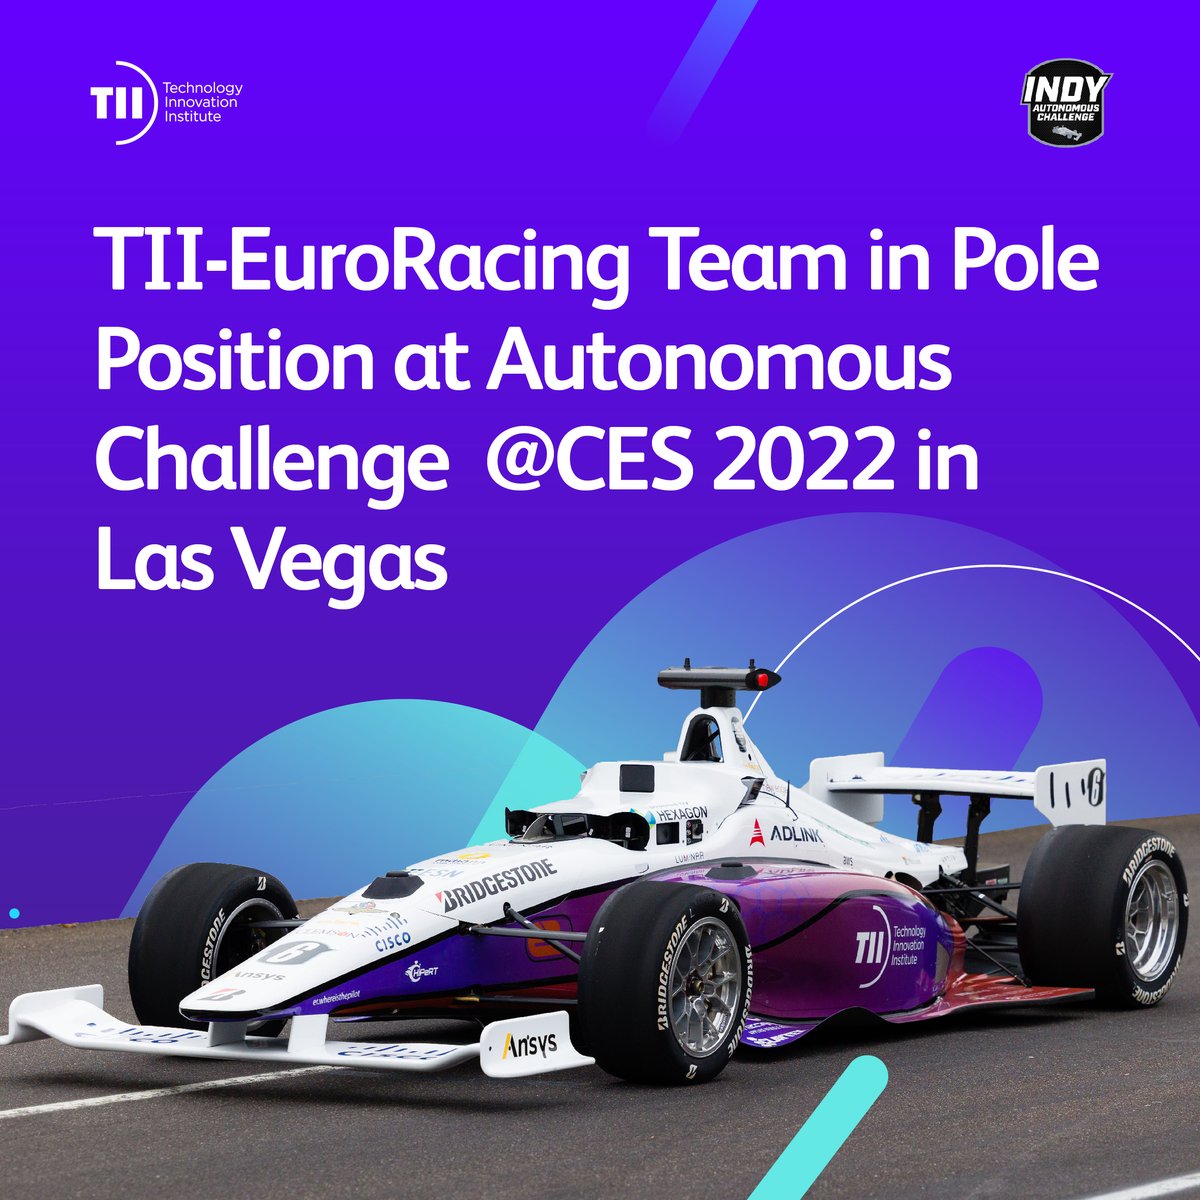 TII-EuroRacing Team is in pole position as it joins other contenders at the upcoming Autonomous Challenge @ CES 2022, which flags off at the Las Vegas Motor Speedway on 7 January 2022. bit.ly/3qLYxzB #InspiringInnovation #CES2022